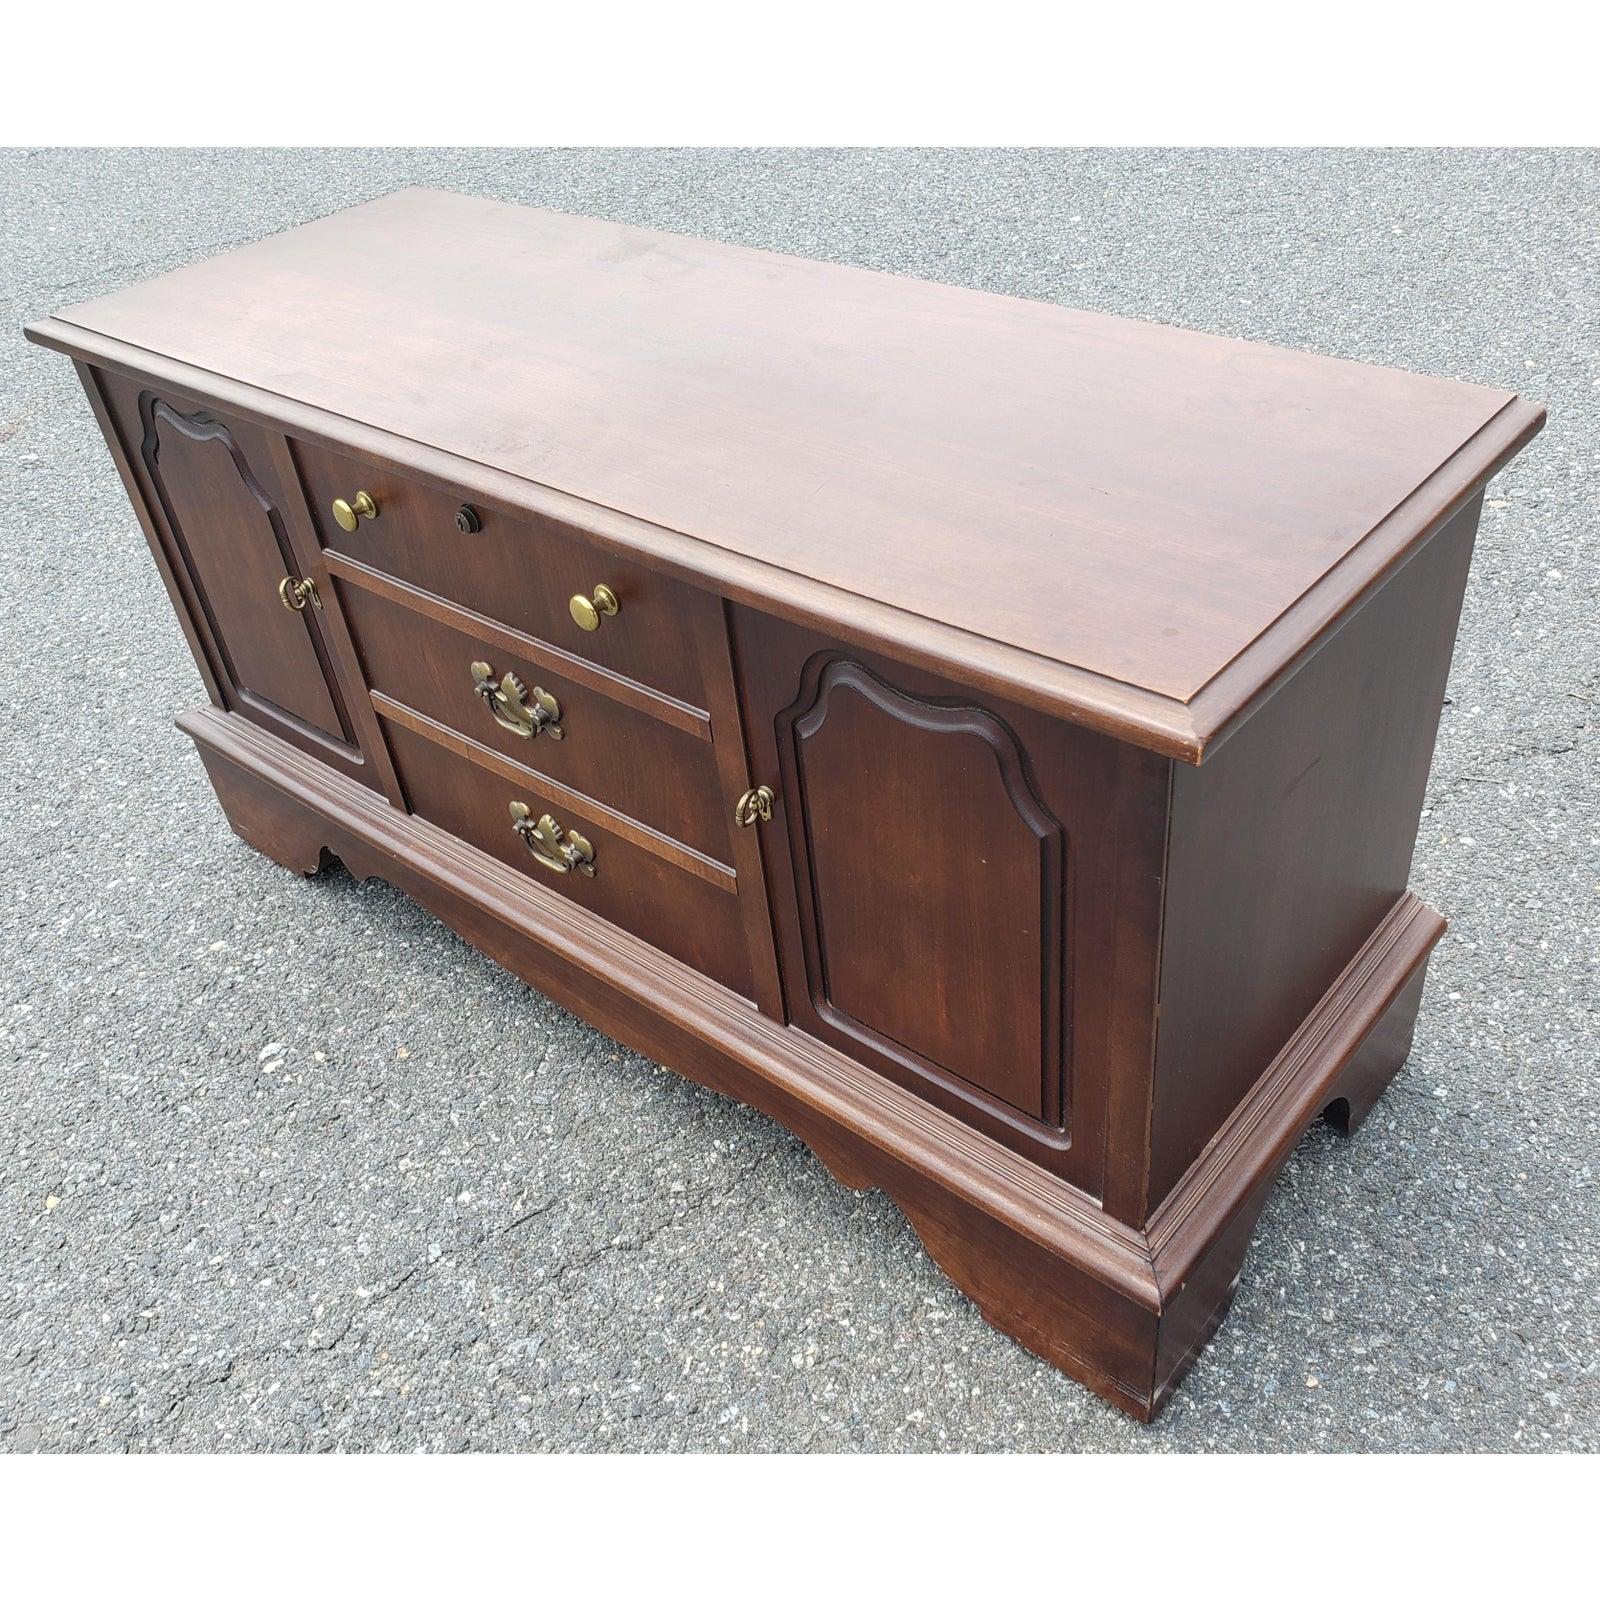 Lane Altavista Cedar chest in excellent condition. Cedar chest in the Chippendale style featuring faux drawers and doors. No keys.
Measures 40W x 16.5D x 22.5H.